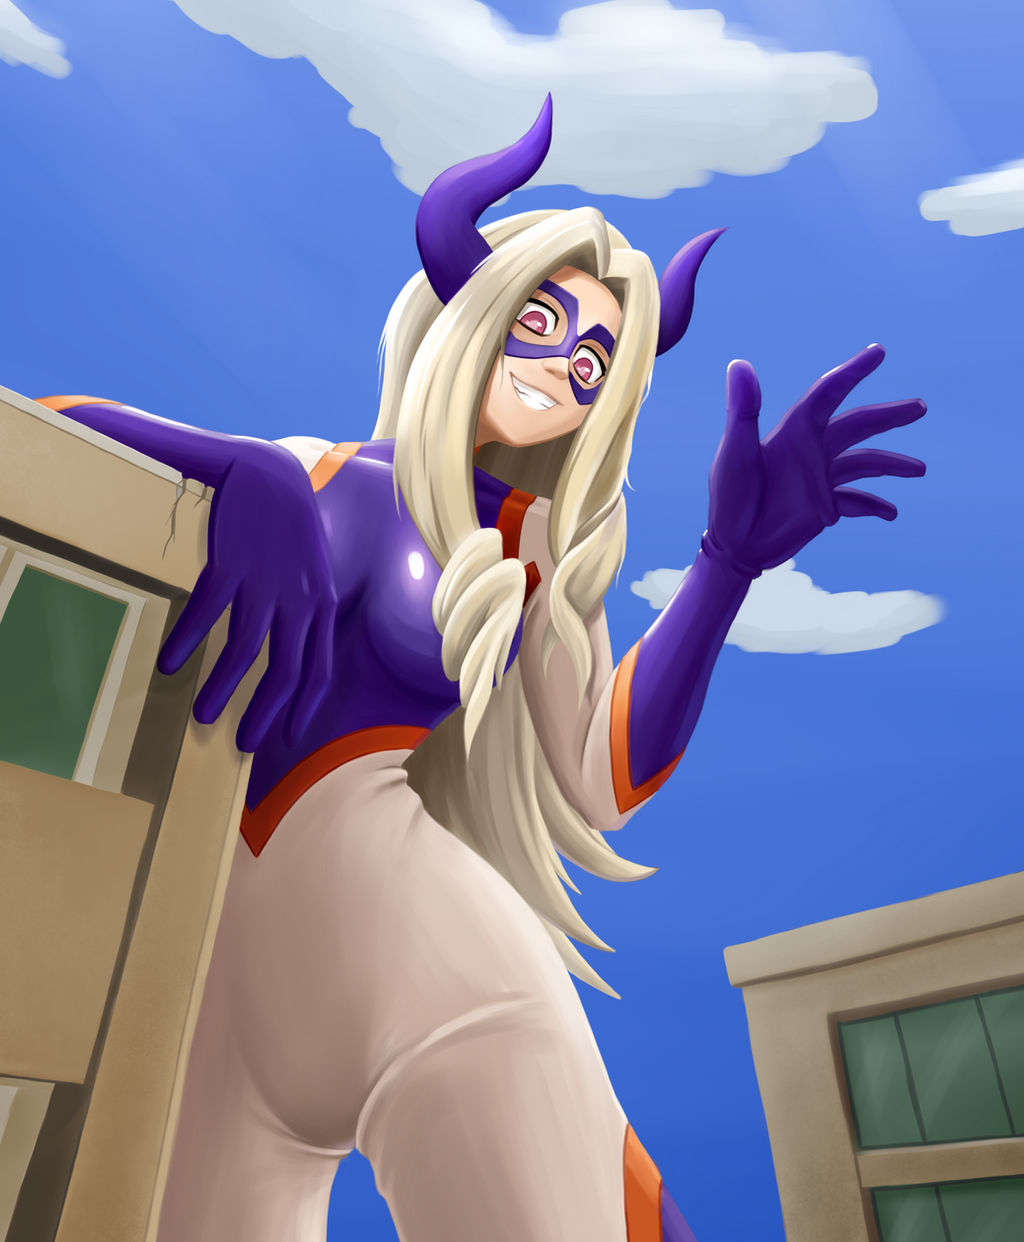 Mt. Lady says hey by Lahley on DeviantArt